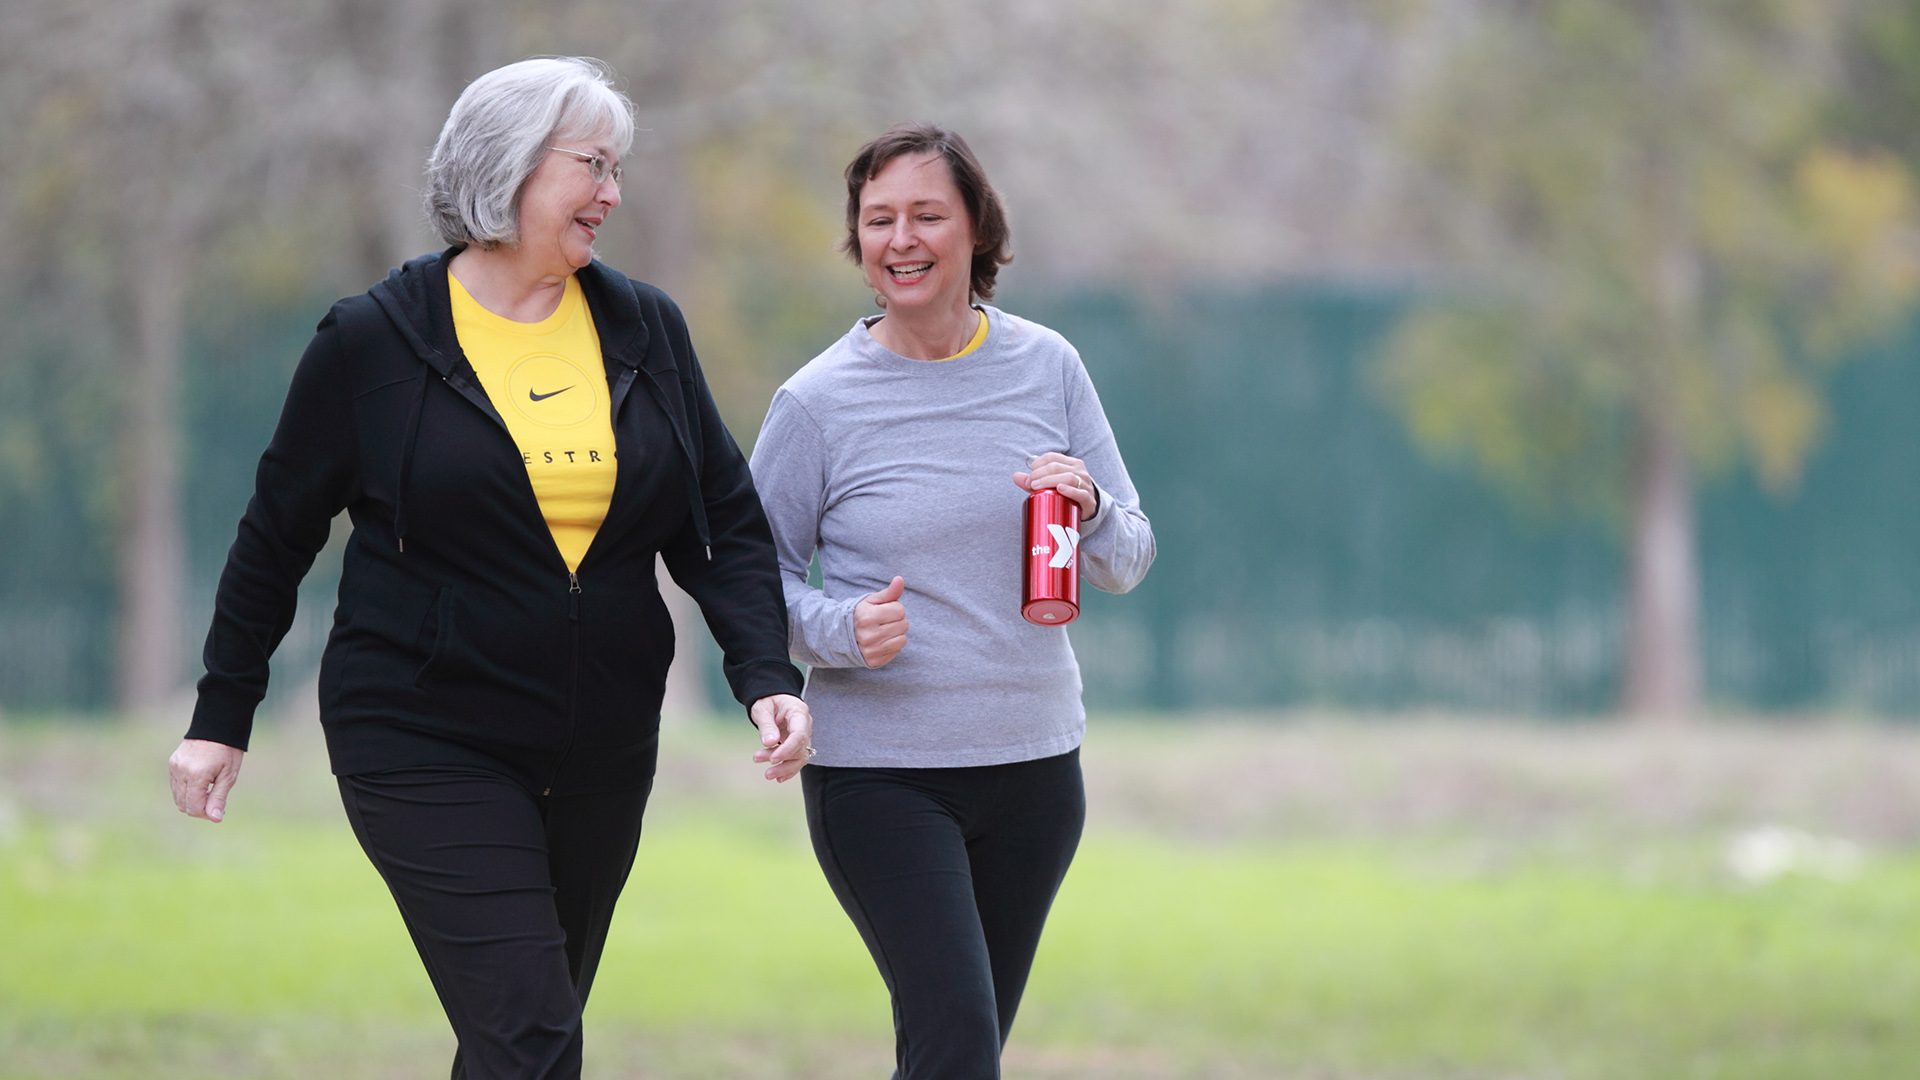 A senior woman and a middle aged woman walking in a park